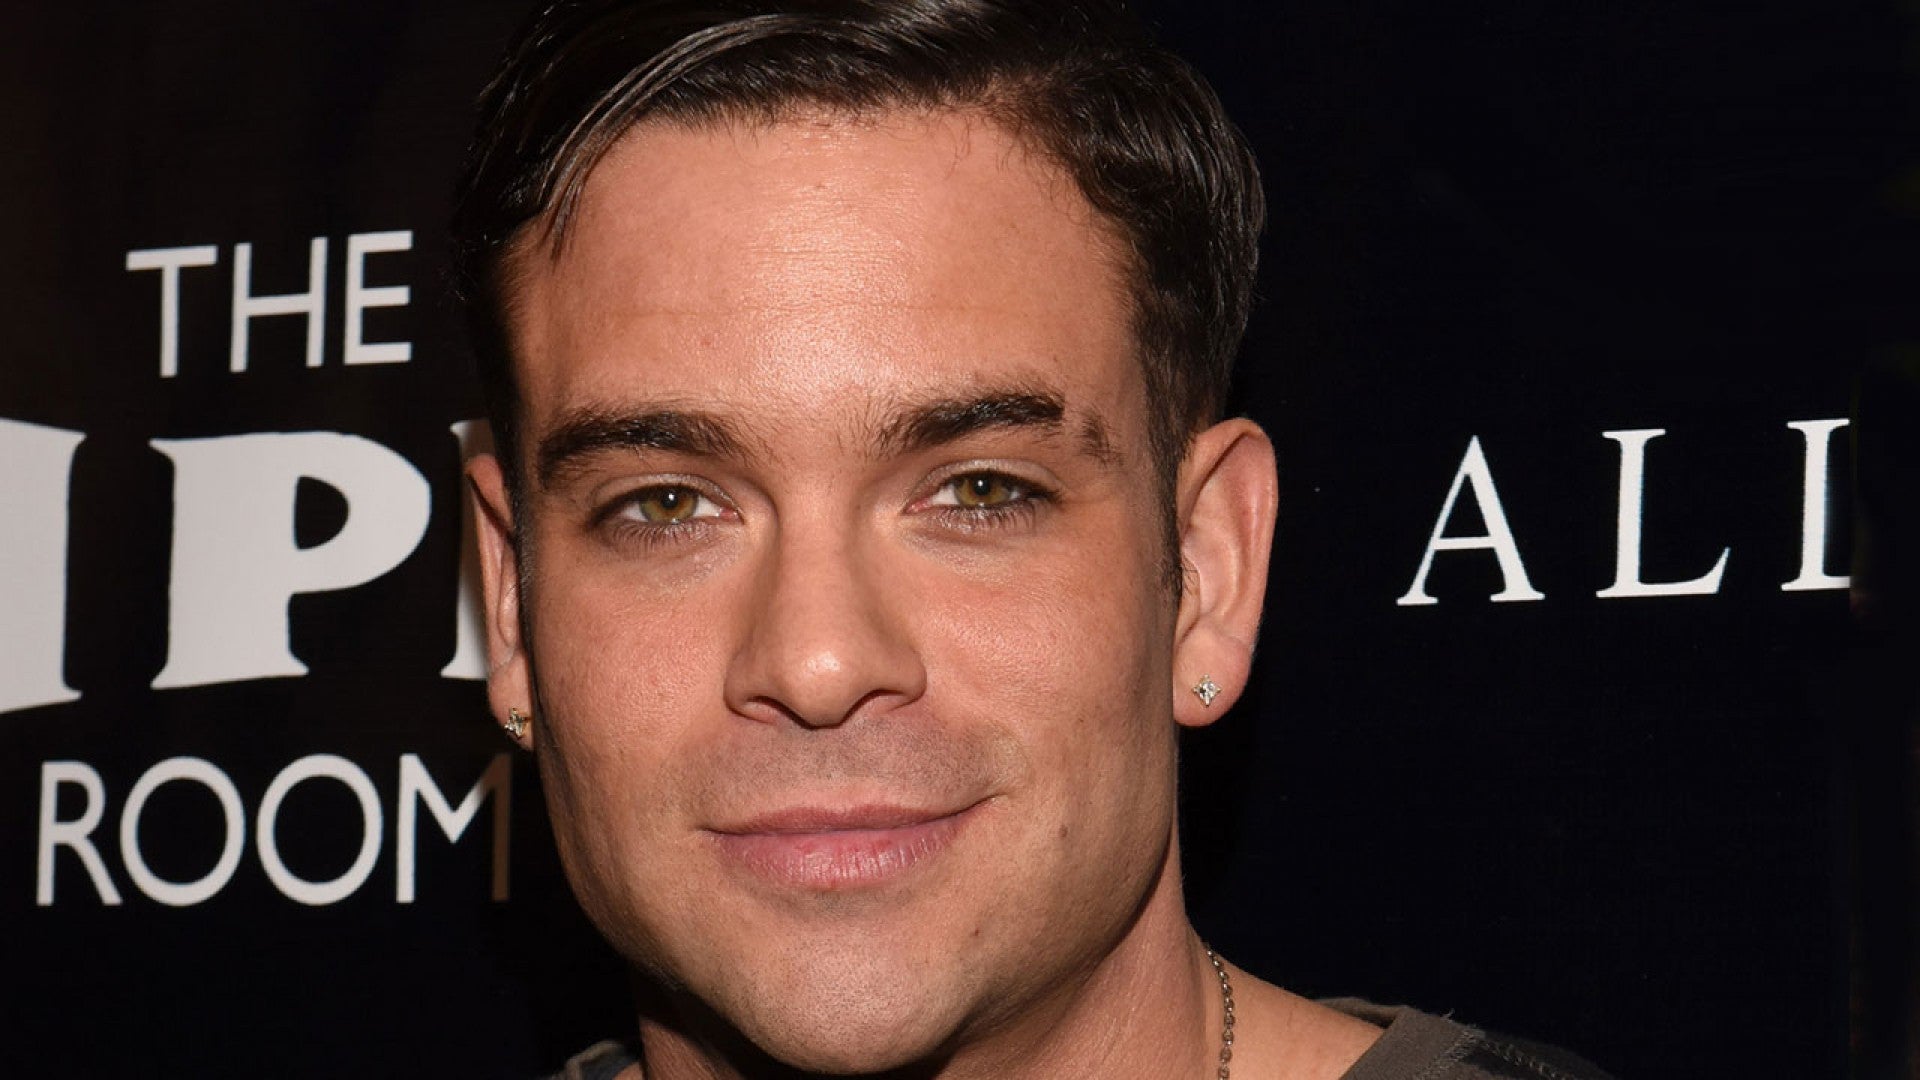 1920px x 1080px - Former 'Glee' Star Mark Salling Indicted on Child Pornography Charges